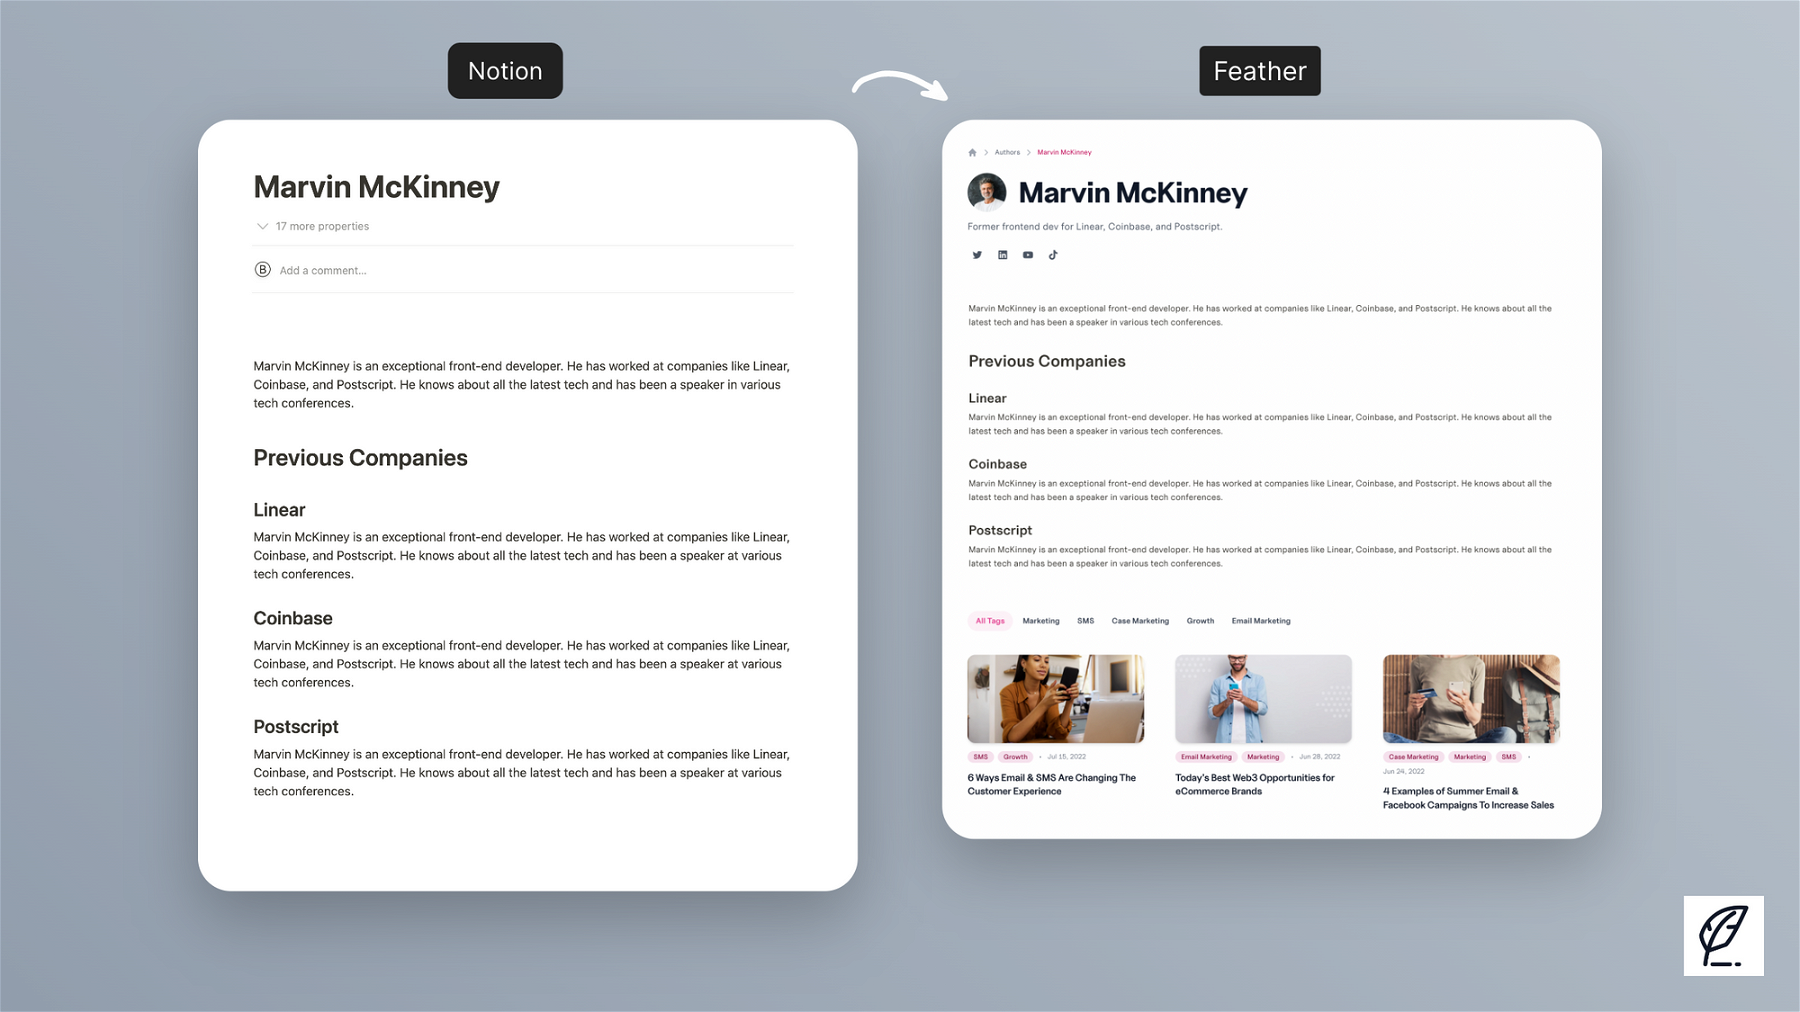 Individual Author Page with more Notion content